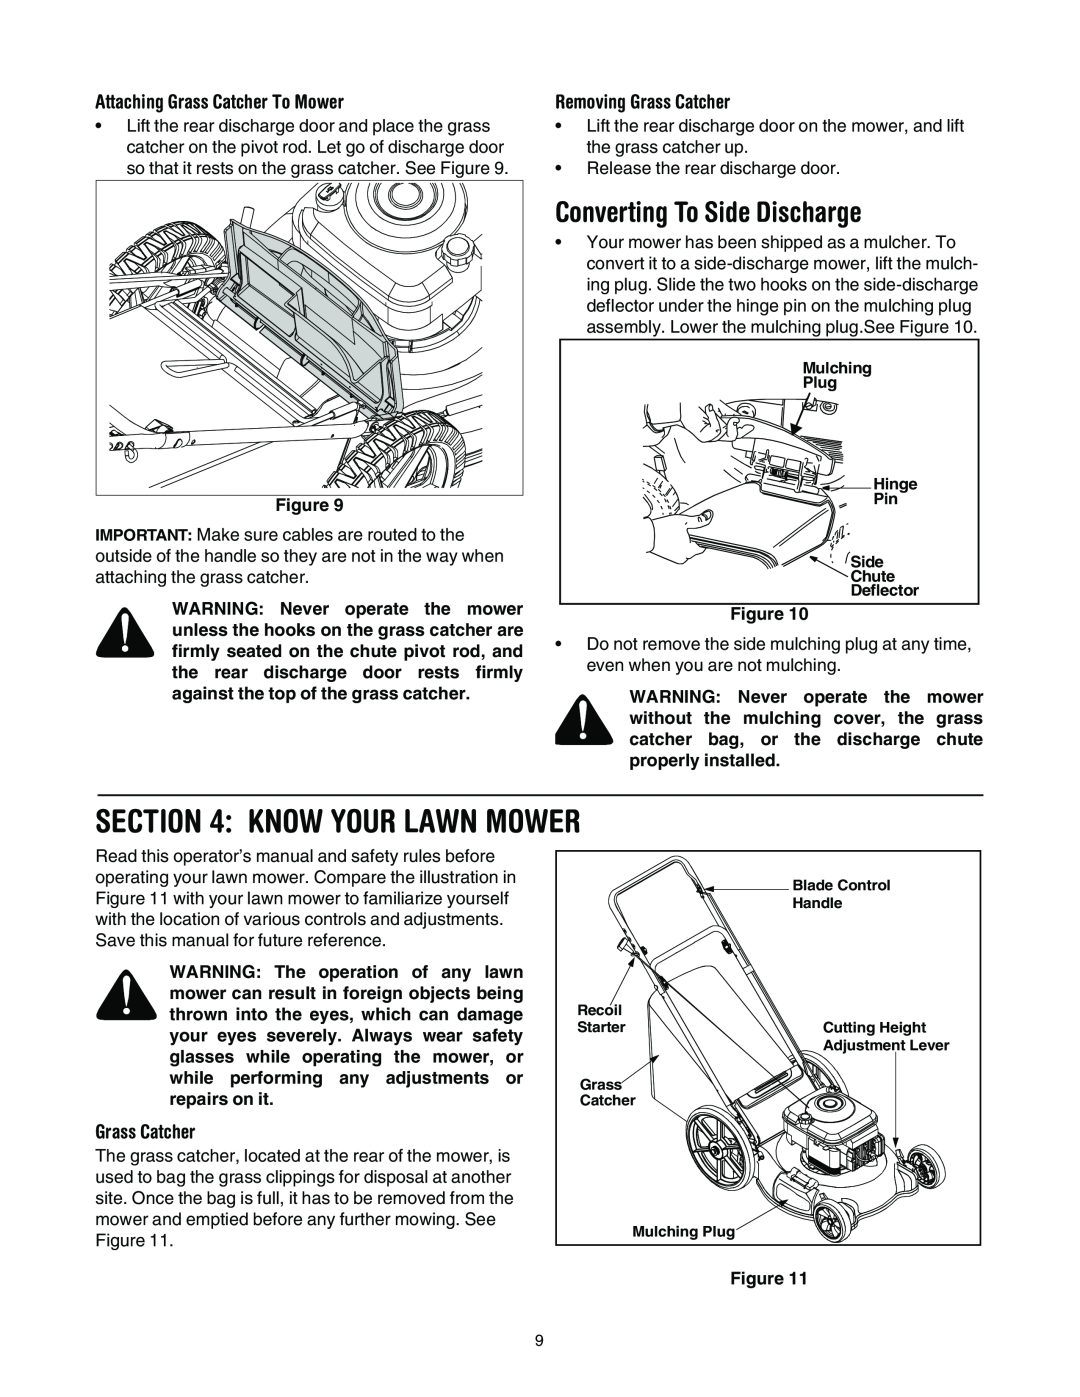 MTD 11A-545D034 manual Know Your Lawn Mower, Converting To Side Discharge, Attaching Grass Catcher To Mower 